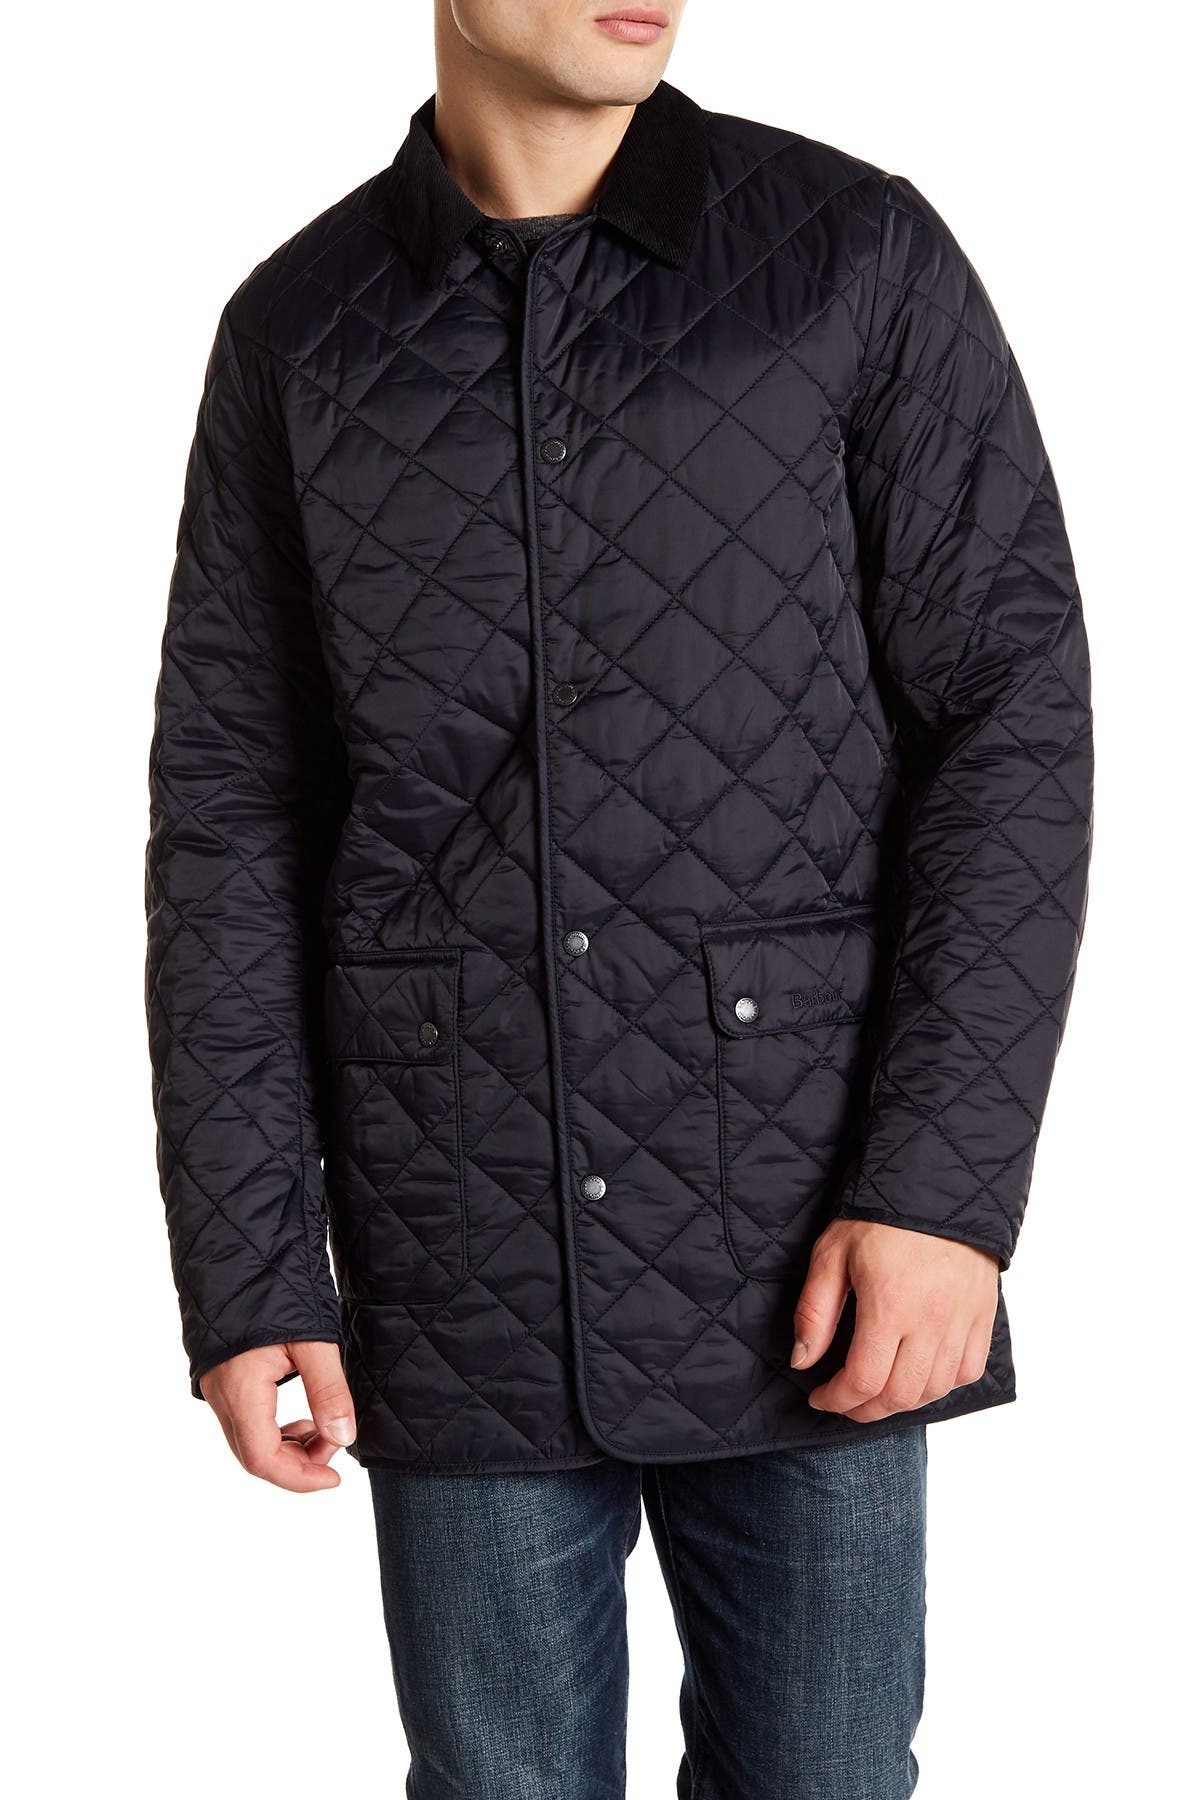 Barbour | Thurland Quilted Jacket 